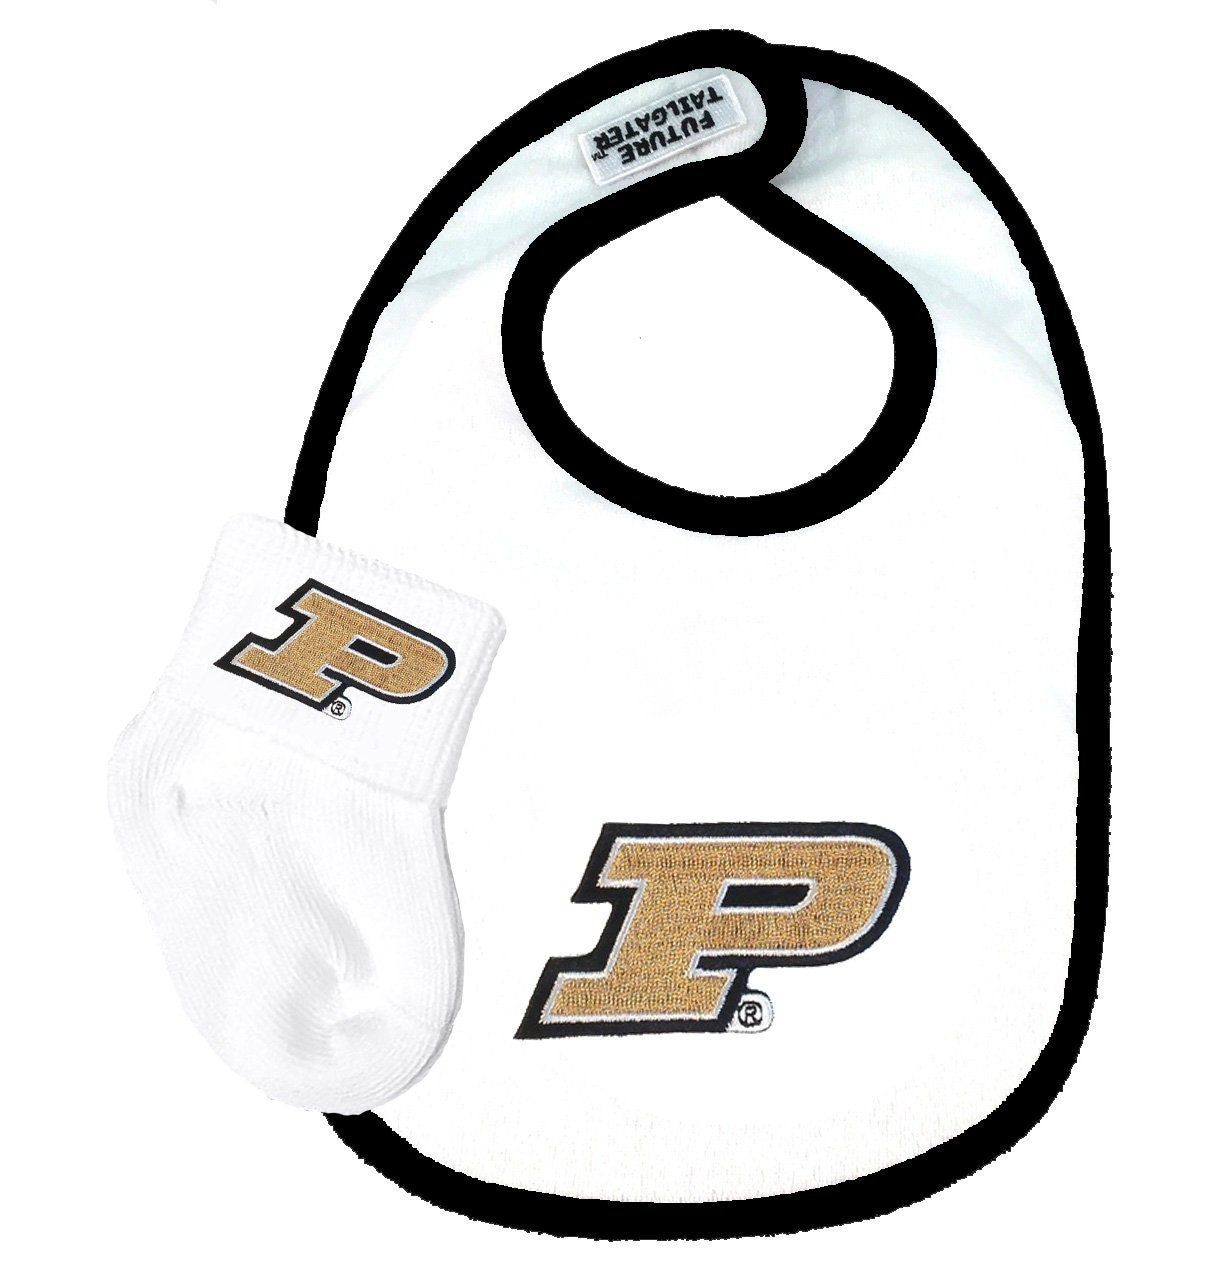 Boilermakers baby jersey